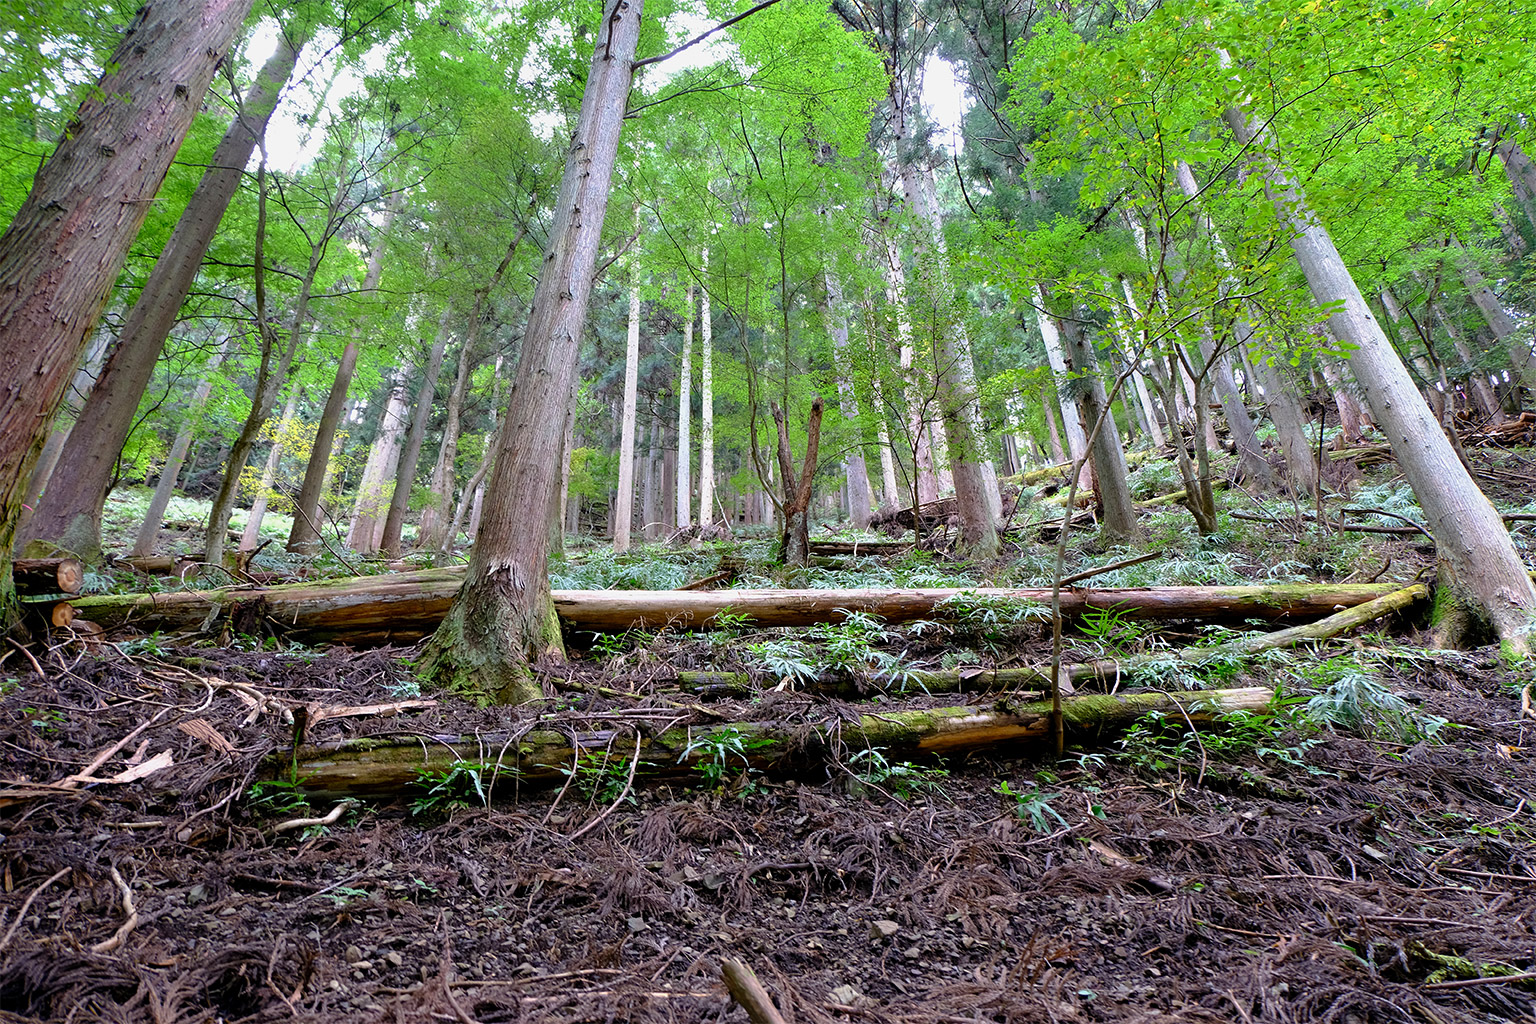 A planted forest that has undergone thinning.